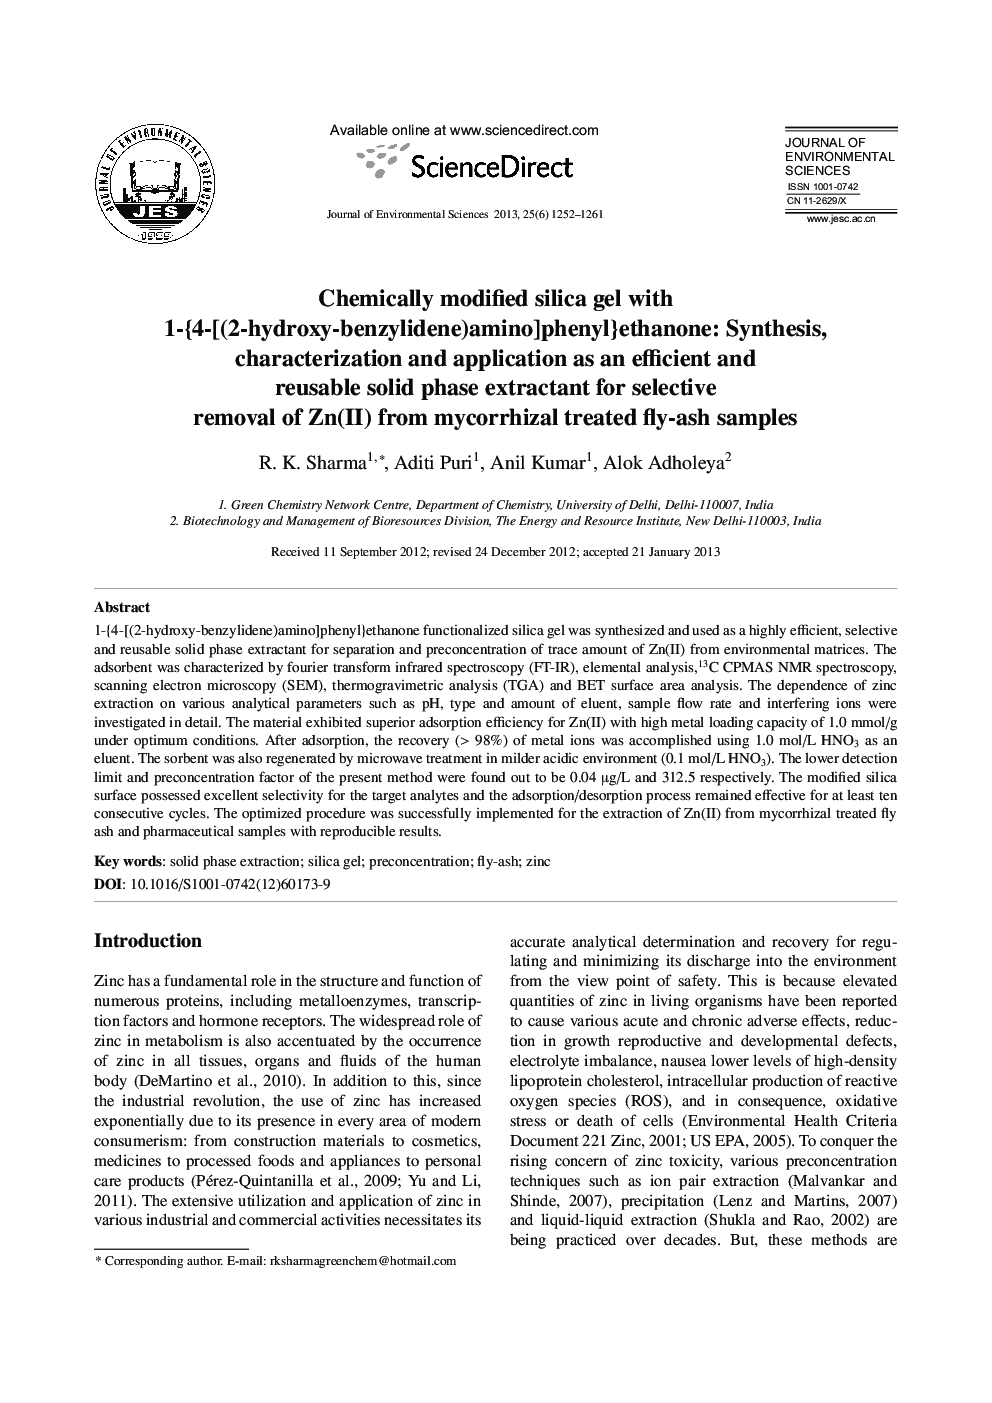 Chemically modified silica gel with 1-{4-[(2-hydroxy-benzylidene)amino]phenyl}ethanone: Synthesis, characterization and application as an efficient and reusable solid phase extractant for selective removal of Zn(II) from mycorrhizal treated fly-ash sample